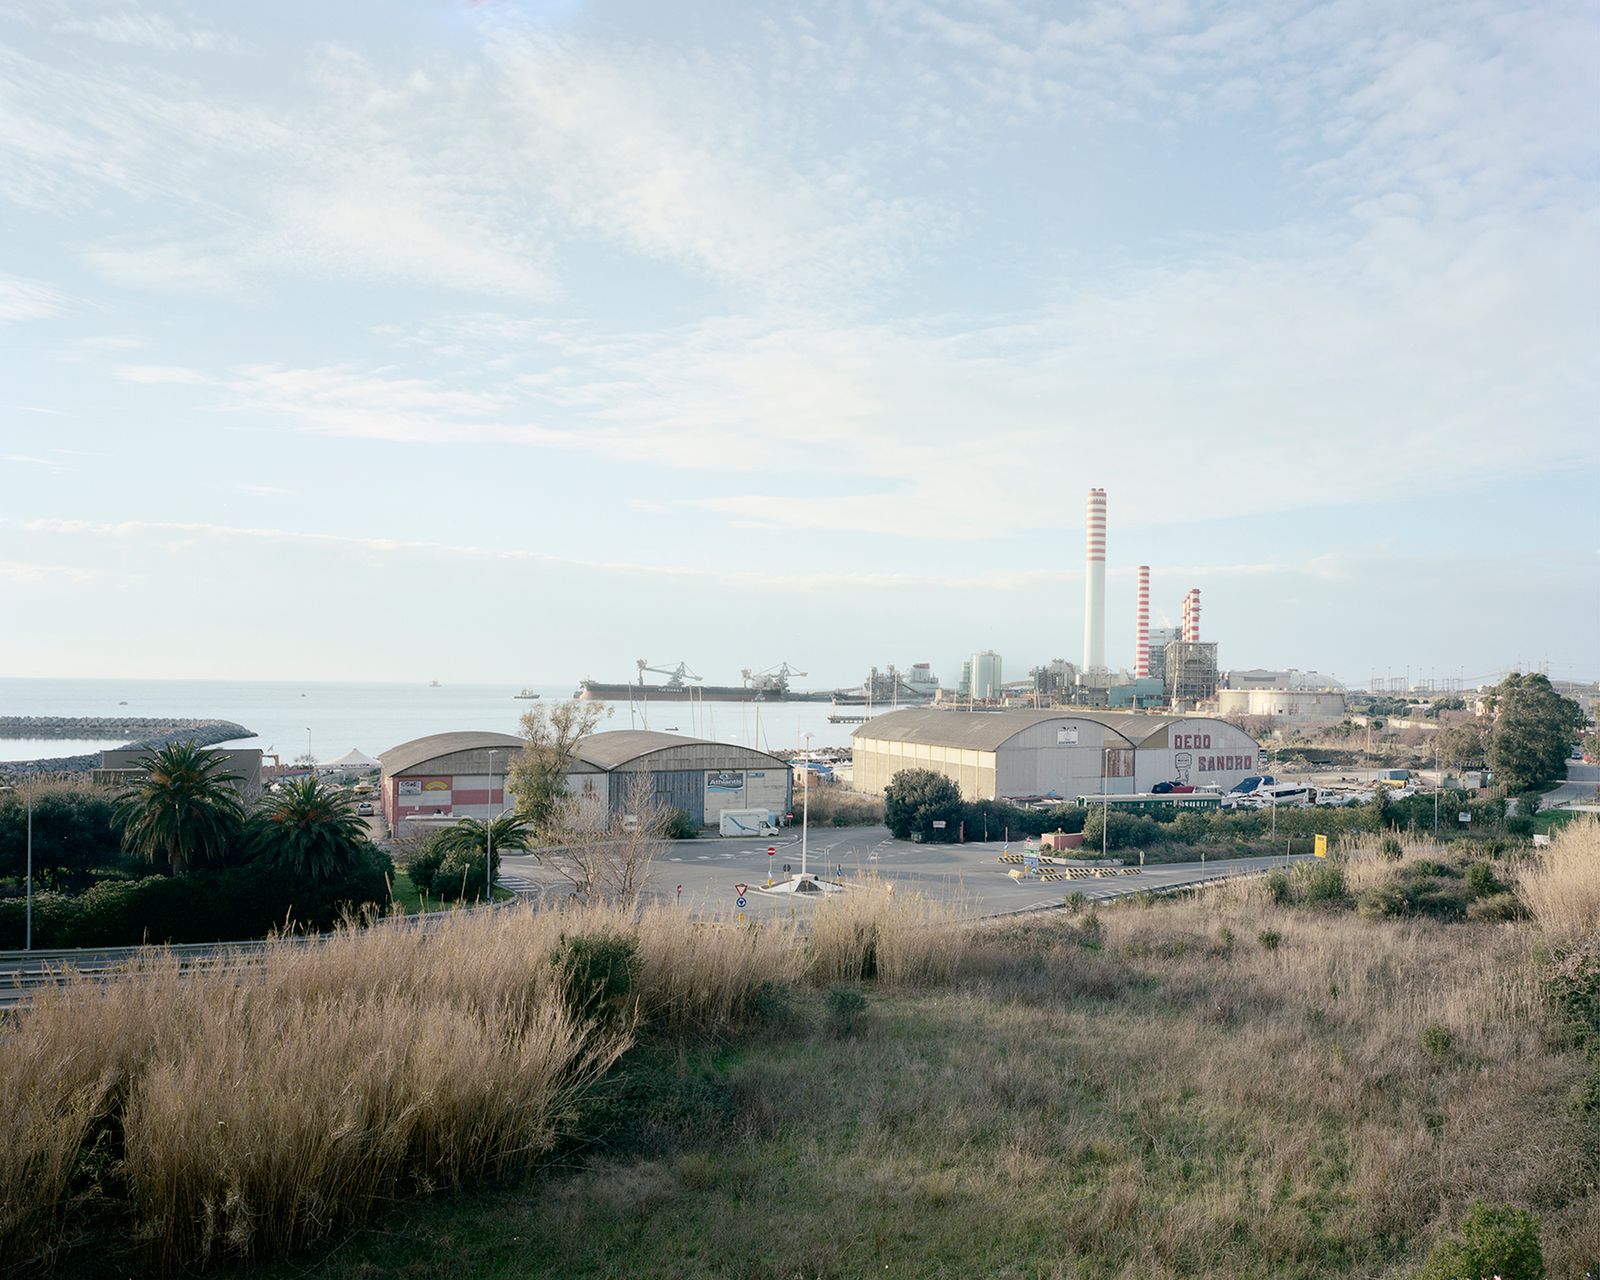 © Pietro Viti - Image from the The coal file vol.1: The italian Coal photography project